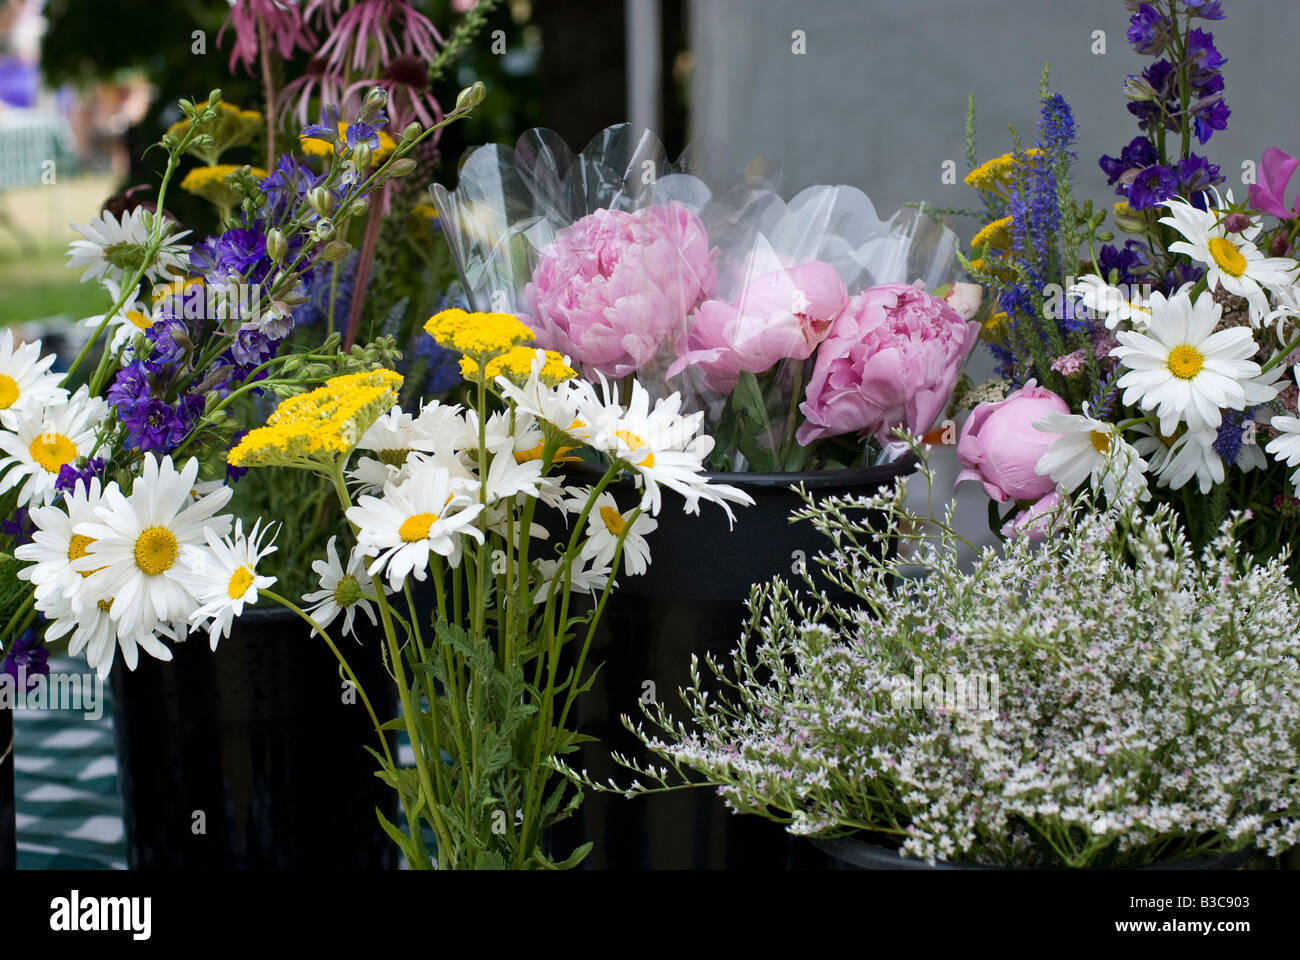 Locally grown organic flowers for sale at a farmers market Stock Photo